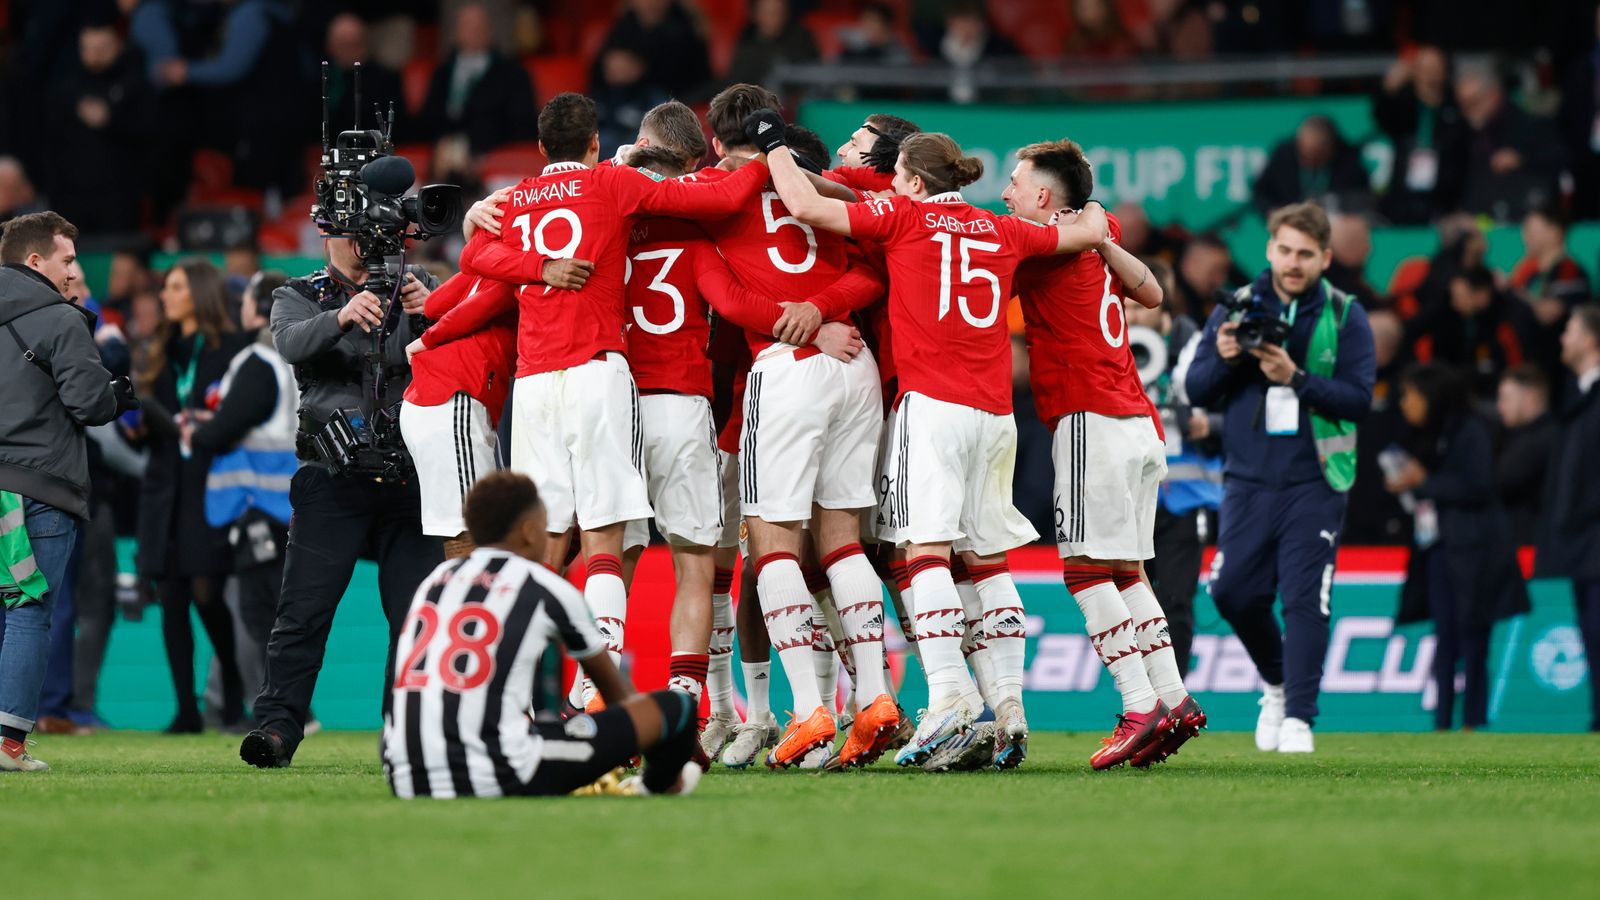 Newcastle boss Eddie Howe insists Carabao Cup final revenge not on mind for his side against Manchester United